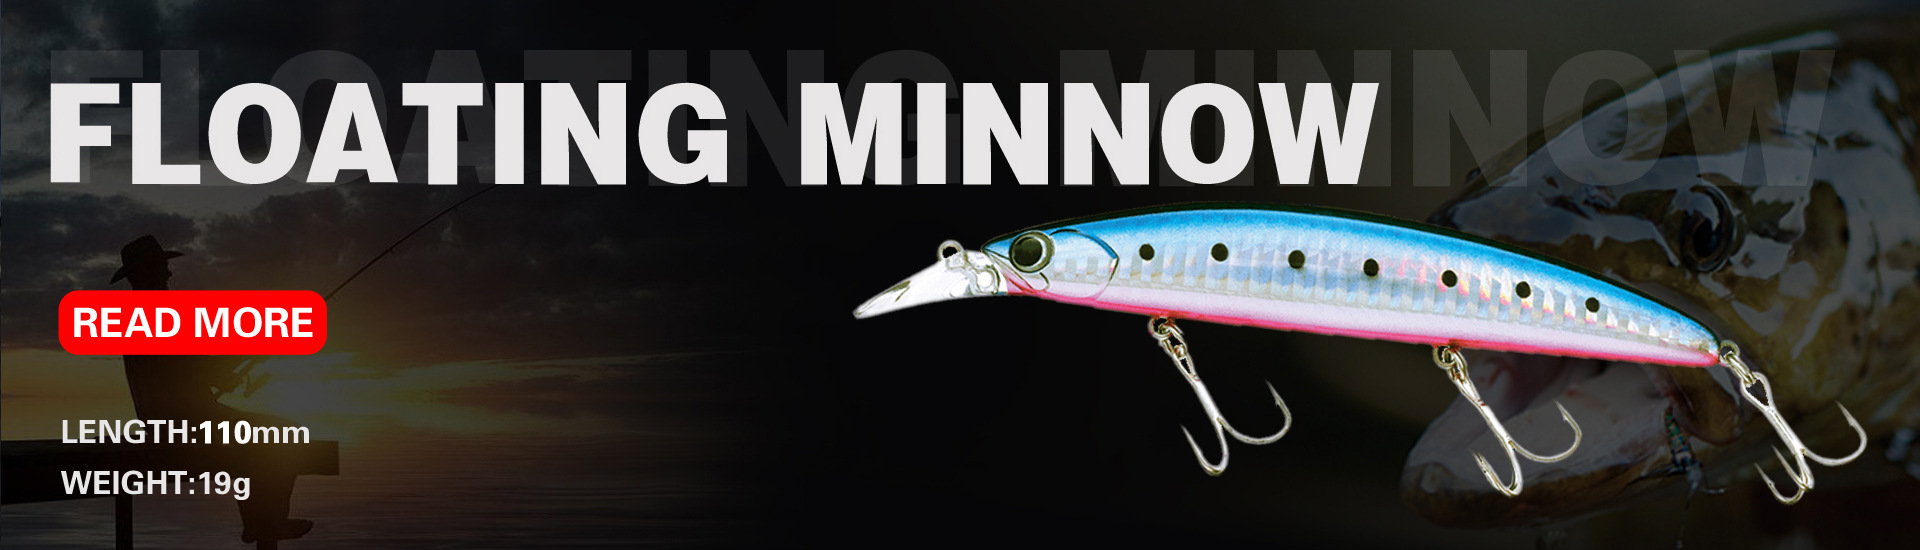 Hard Swimbaits Jointed Swimbaits Electric Minnows Lures Bass Trout Fresh Water Fishing Lure